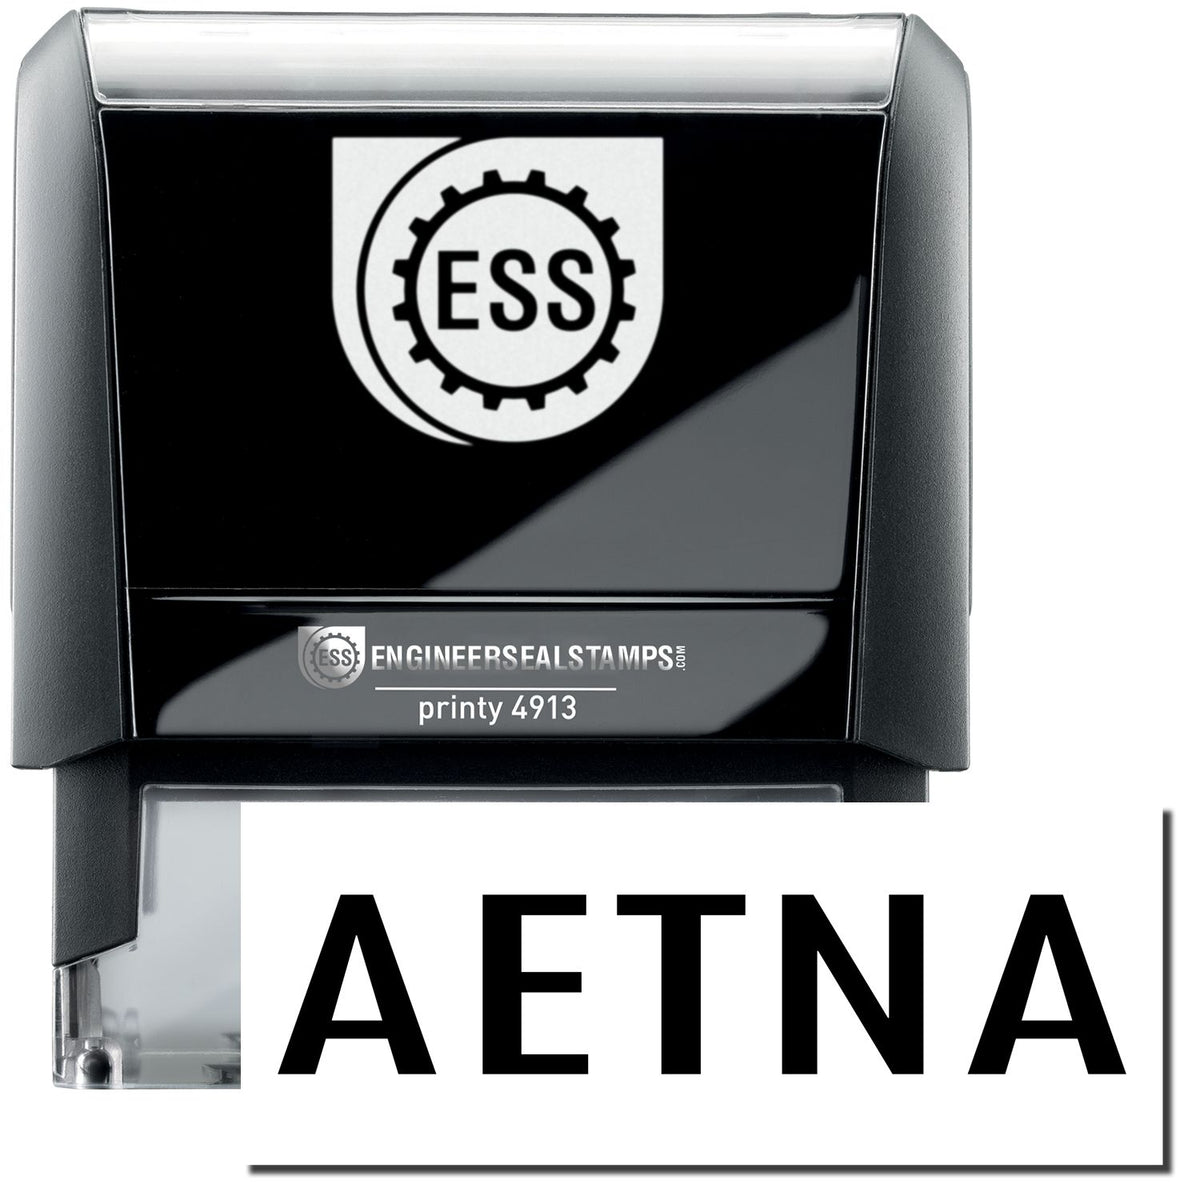 A self-inking stamp with a stamped image showing how the text &quot;AETNA&quot; in a large bold font is displayed by it.